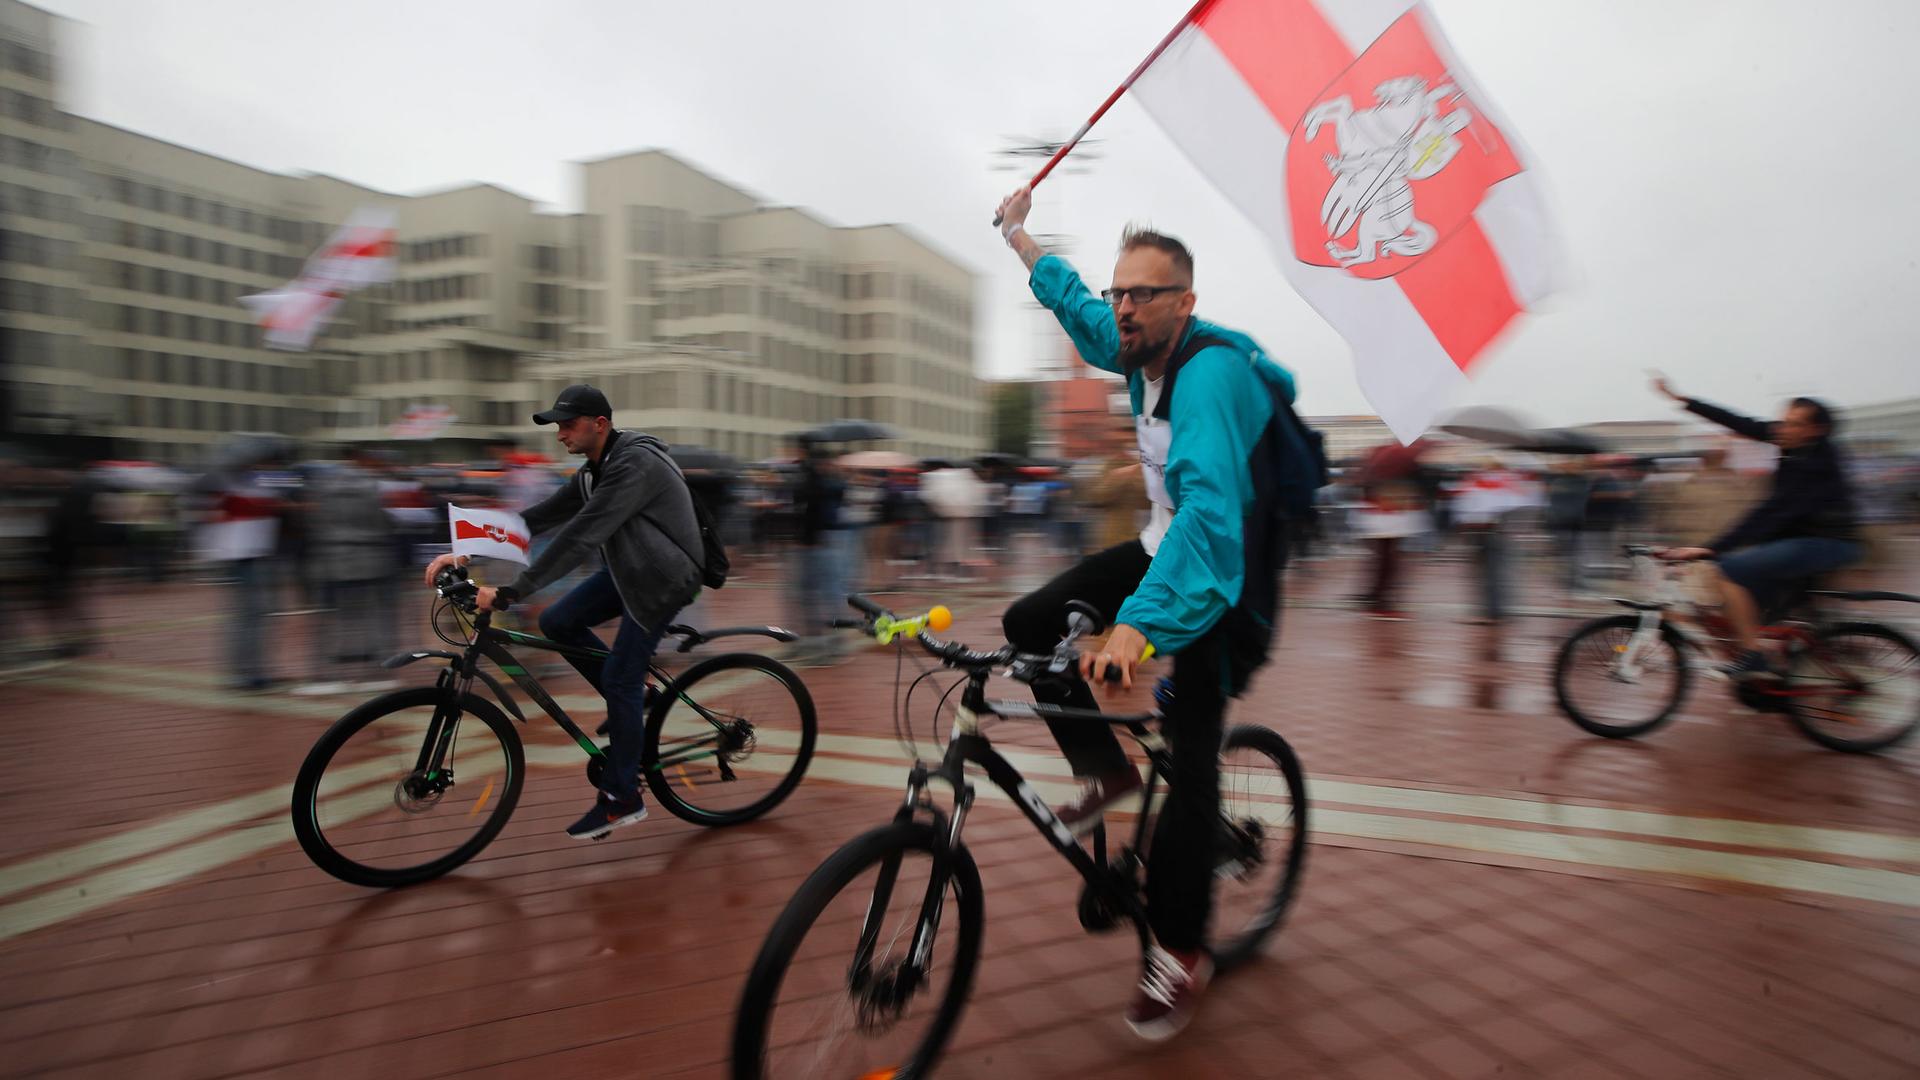 Several people are shown riding bicycles with one carrying an old Belarusian flag in a photograph with blured motion.